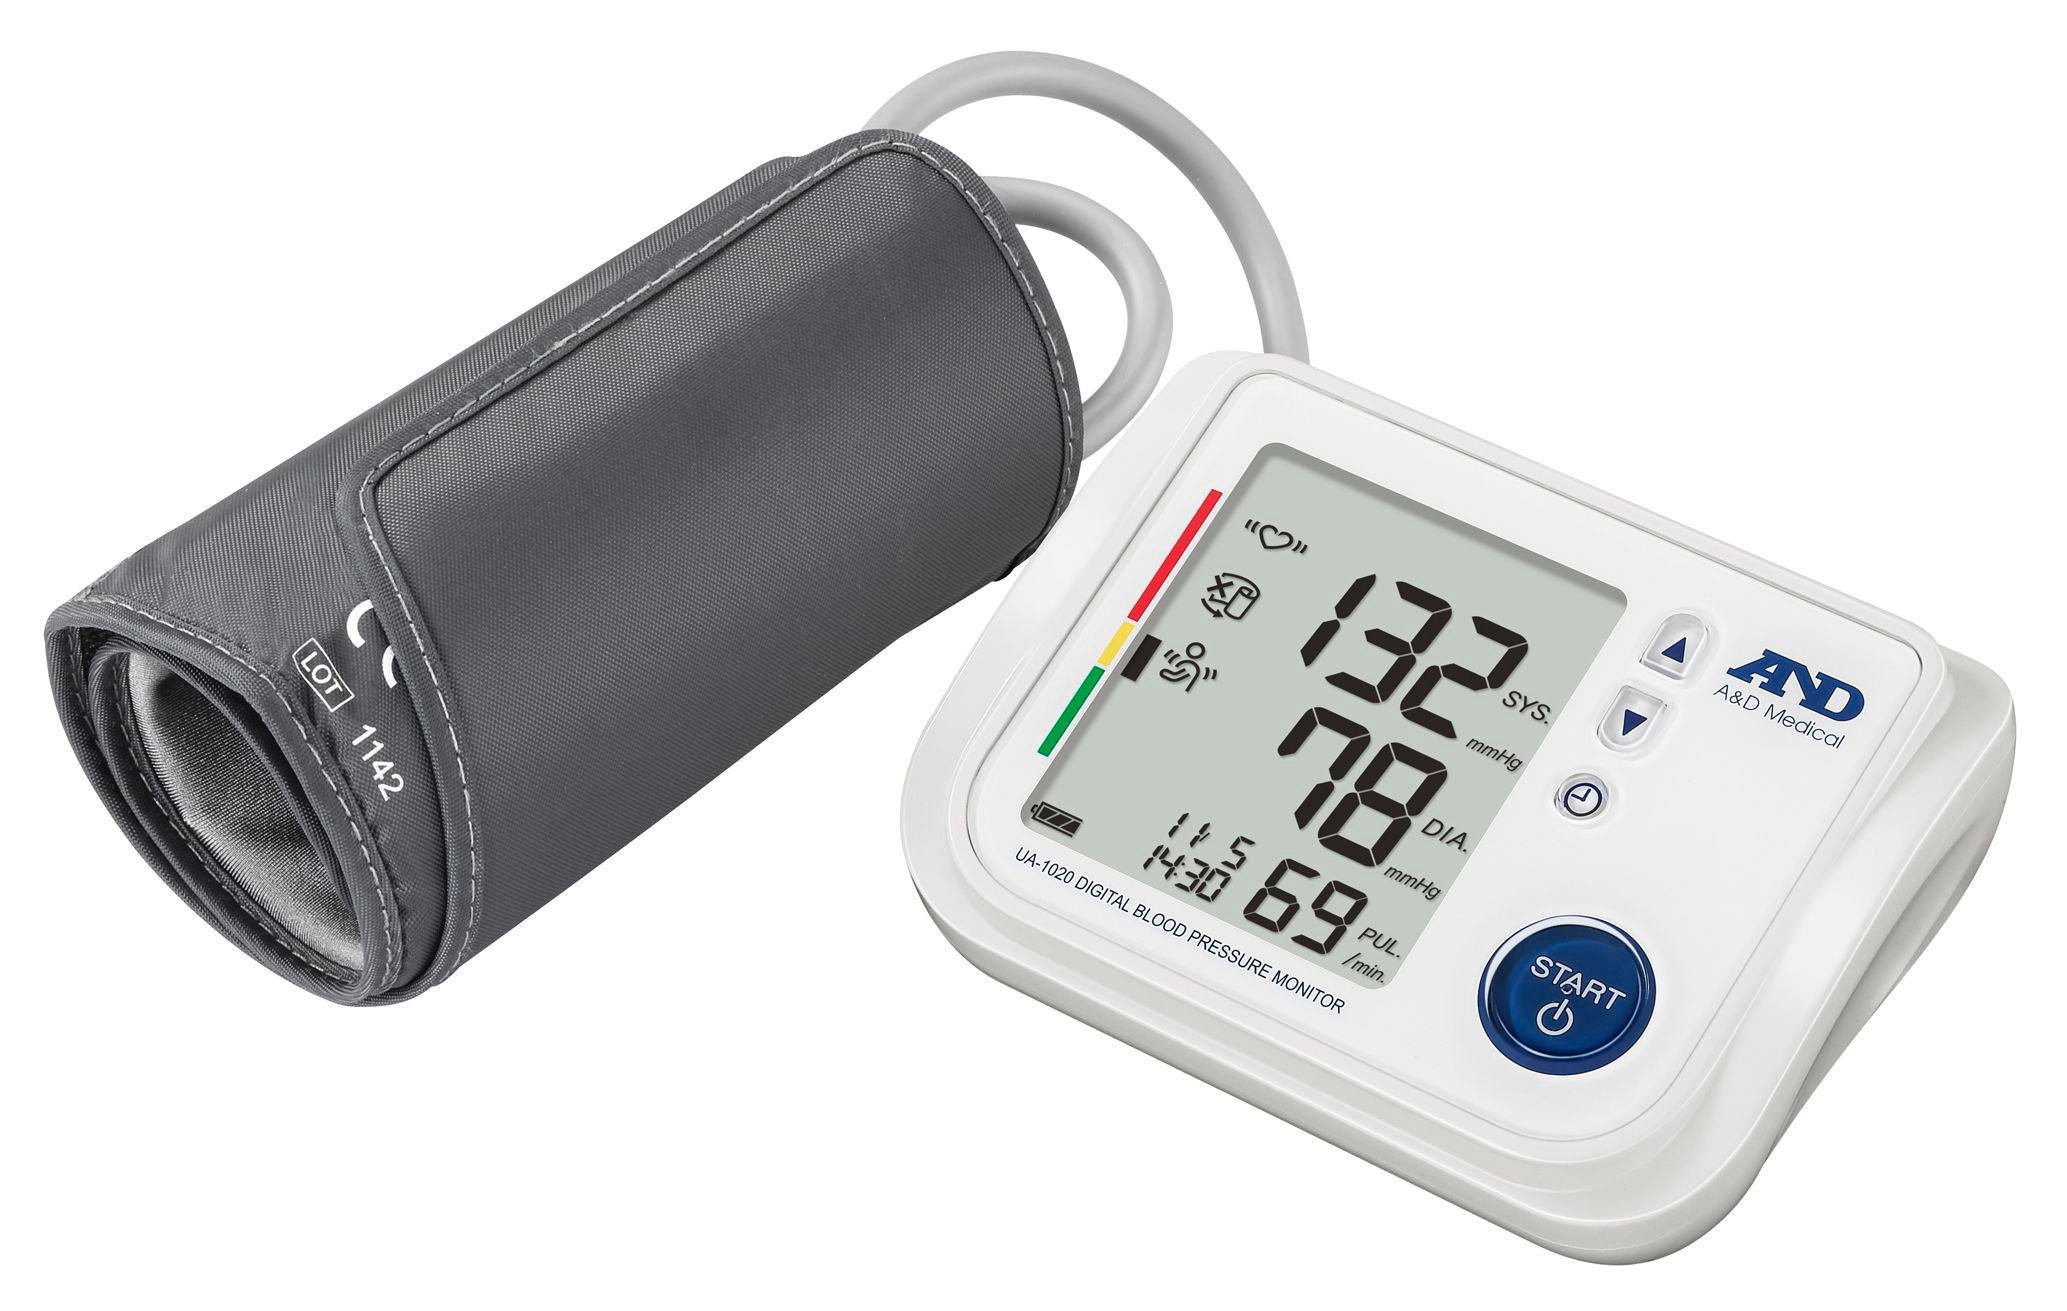 Automatic blood pressure monitor / electronic / arm UA-1020 A&D Company, Limited